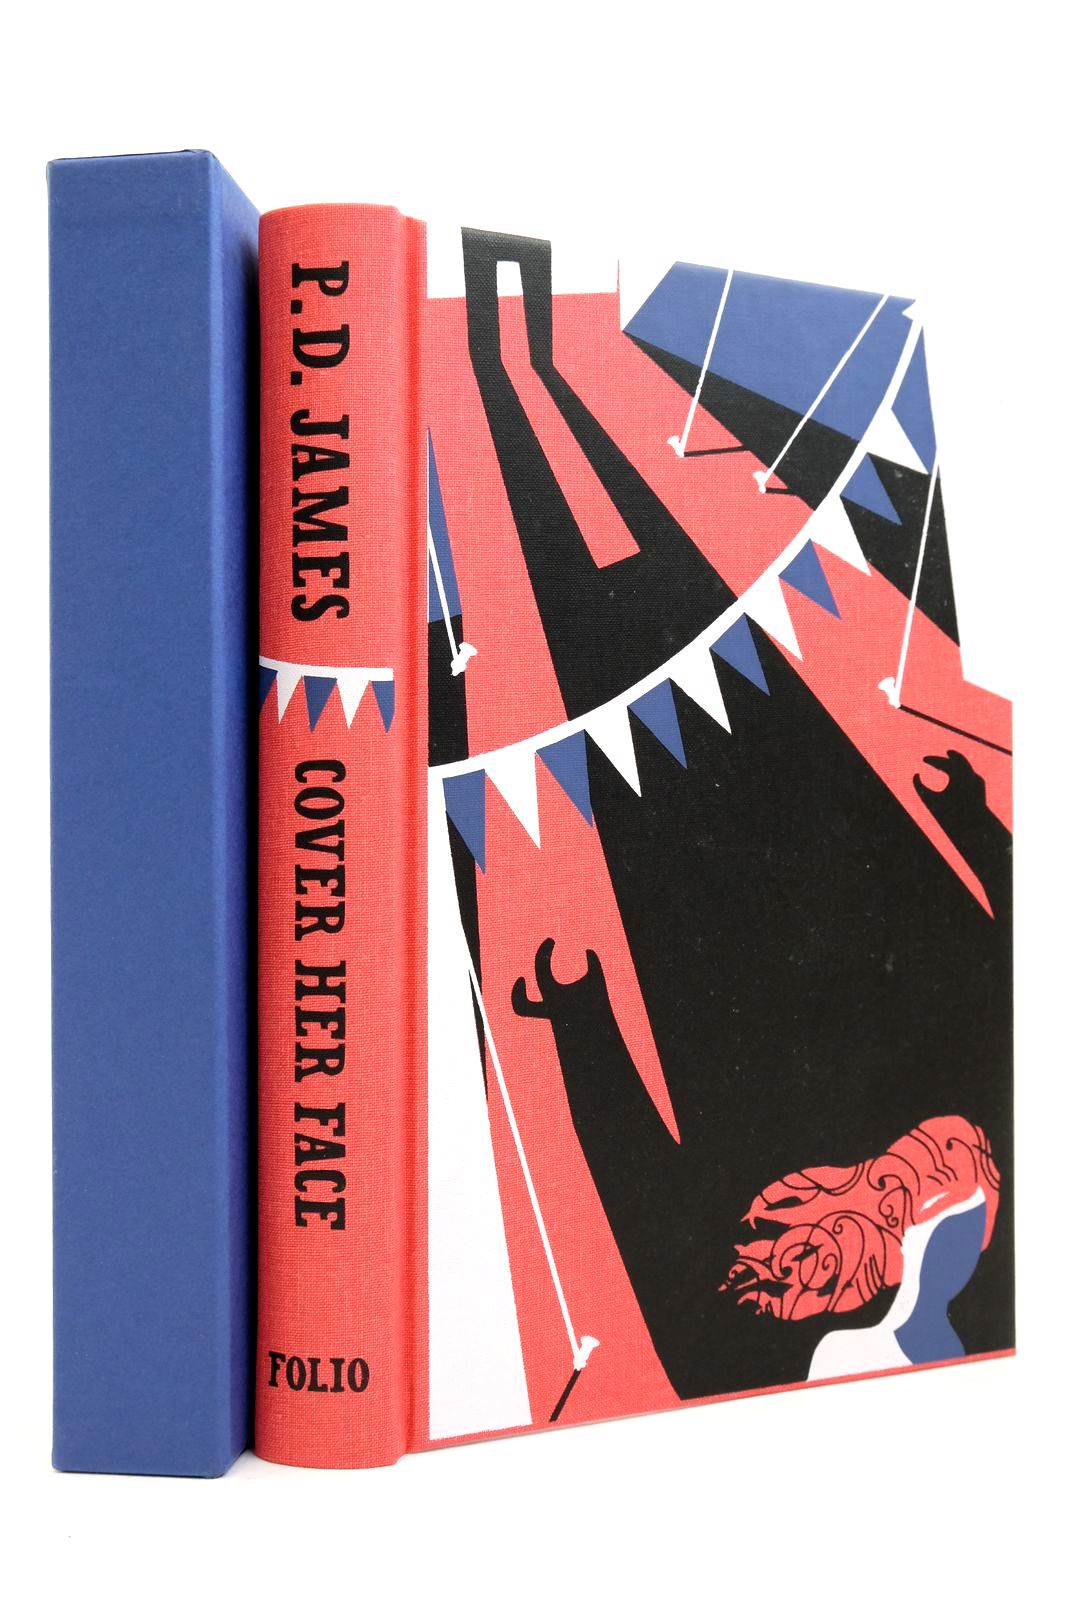 Photo of COVER HER FACE written by James, P.D. illustrated by Burton, Jonathan published by Folio Society (STOCK CODE: 2139342)  for sale by Stella & Rose's Books